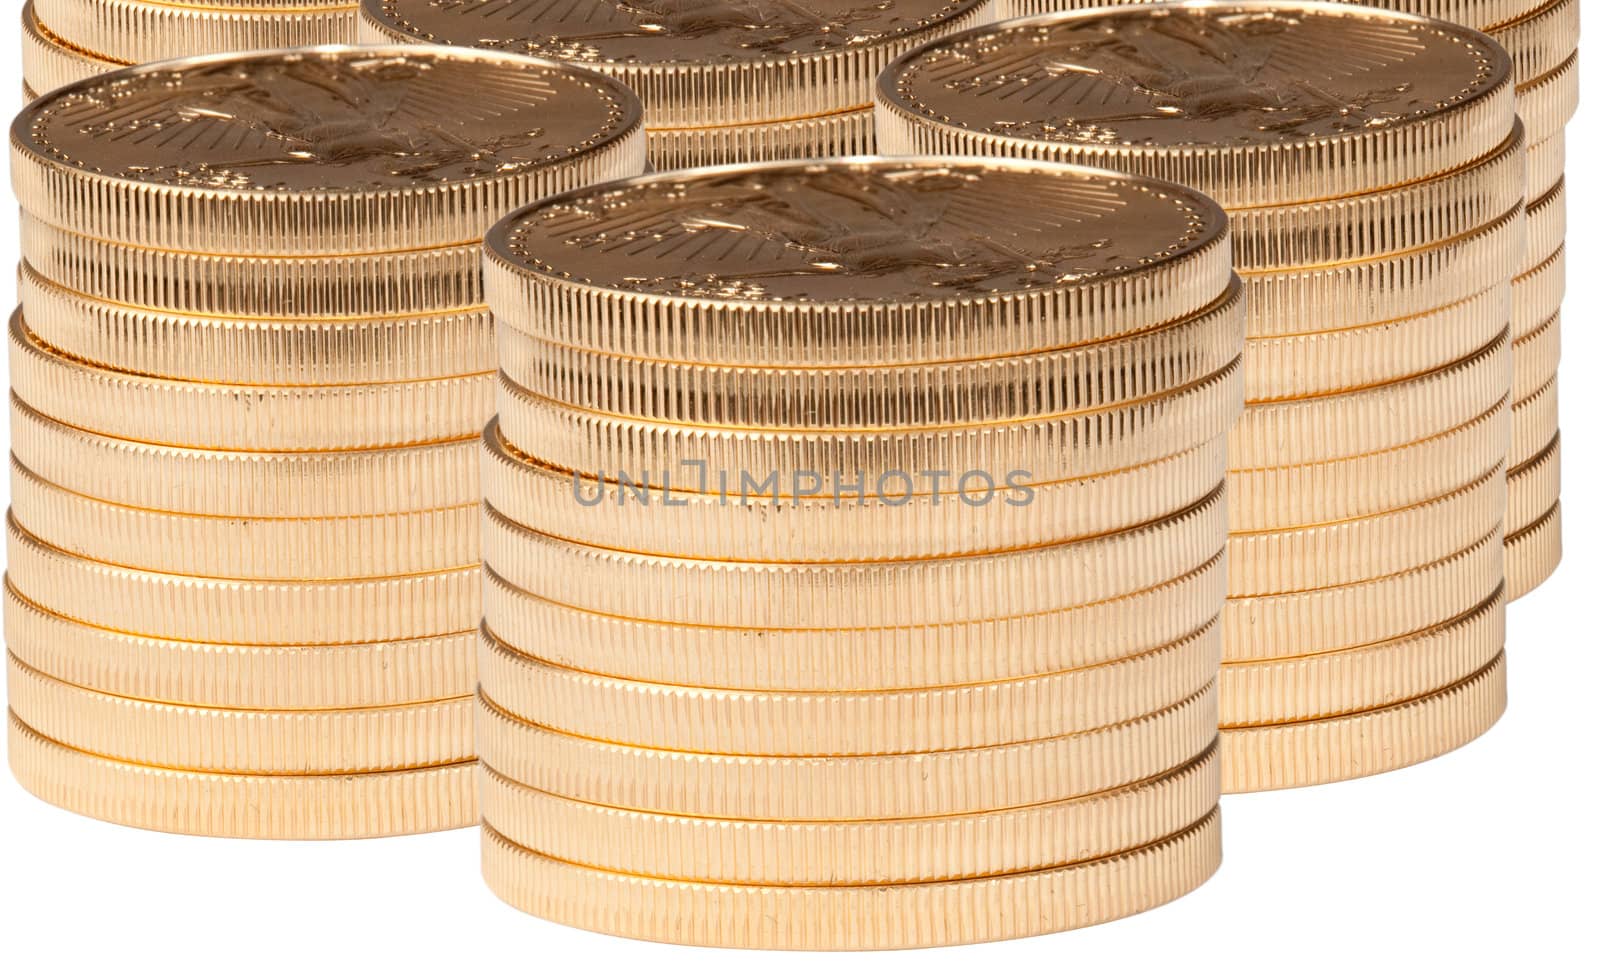 Vertical stacks of gold coins isolated from background